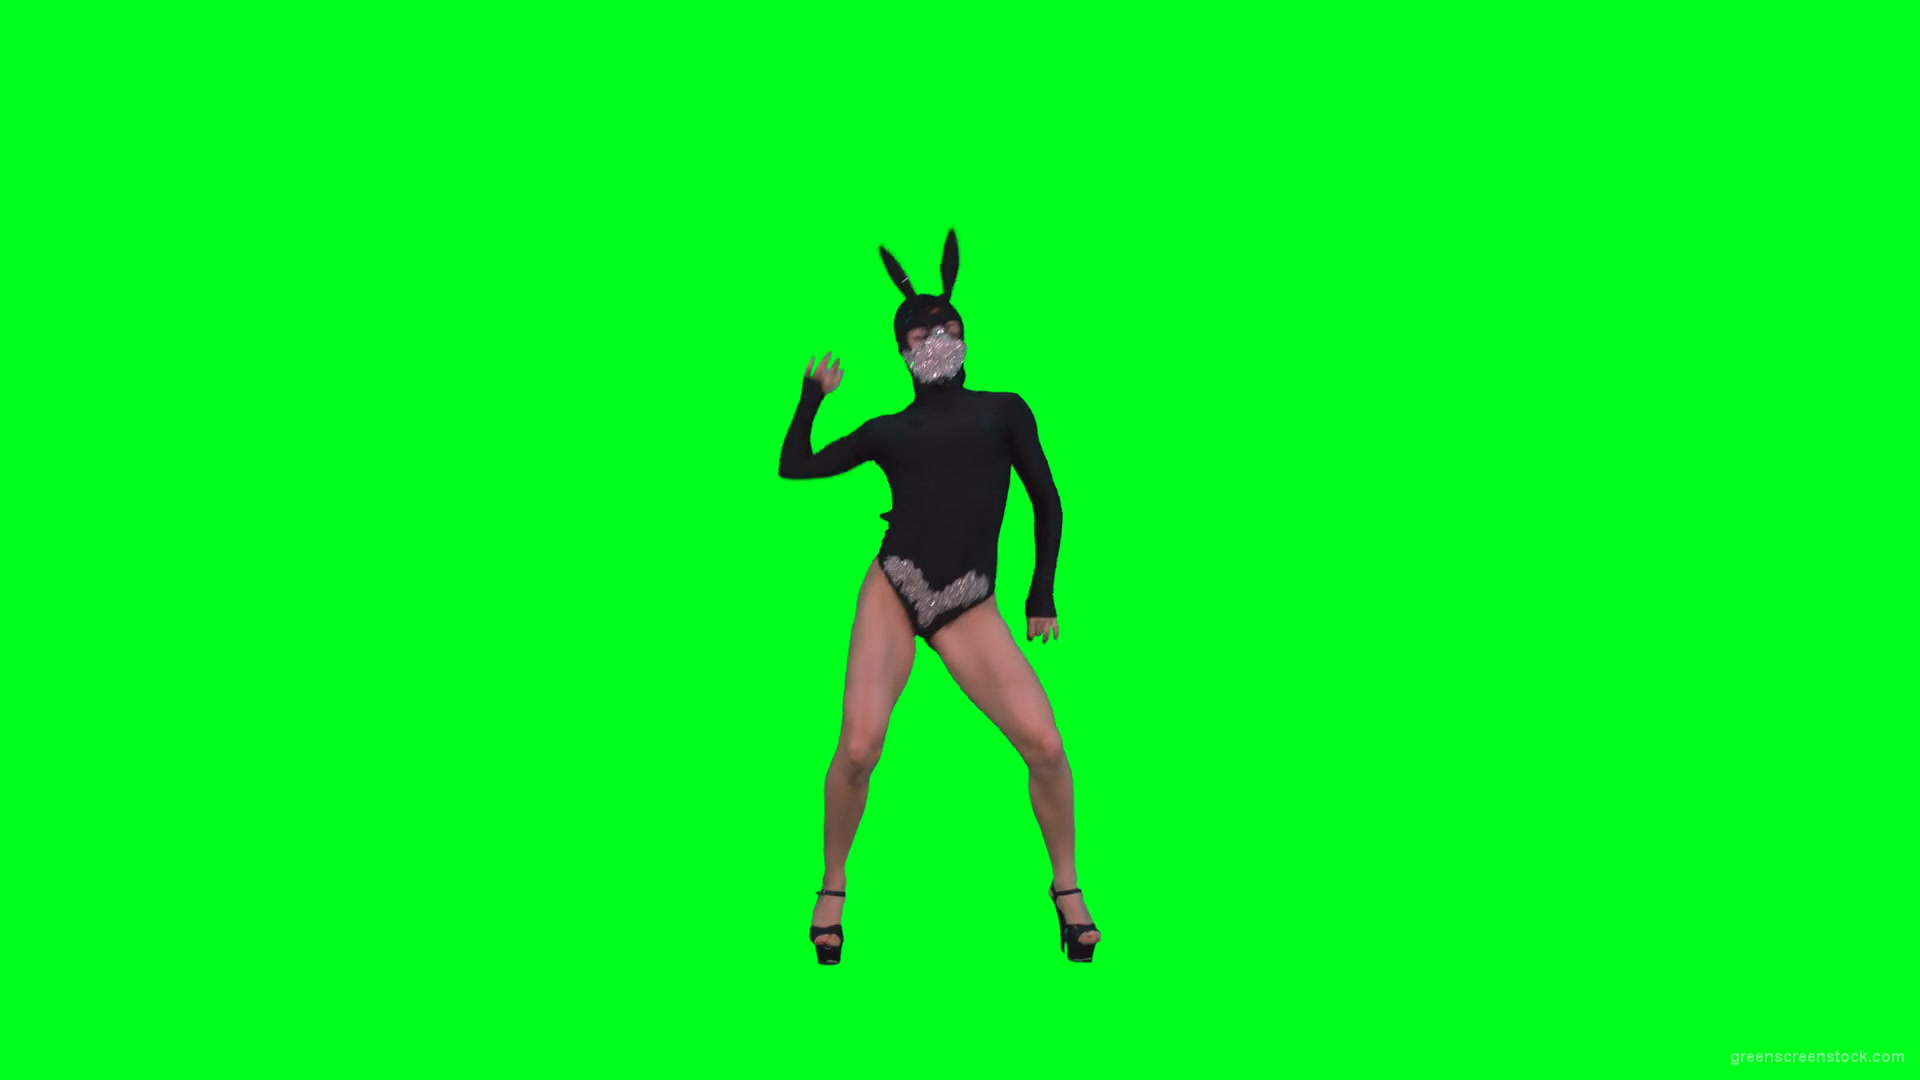 Sexy-dancing-girl-in-rabbit-mask-and-black-fashion-dress-posing-in-fetish-style-isolated-on-green-screen-4K-Video-Footage-1920_005 Green Screen Stock